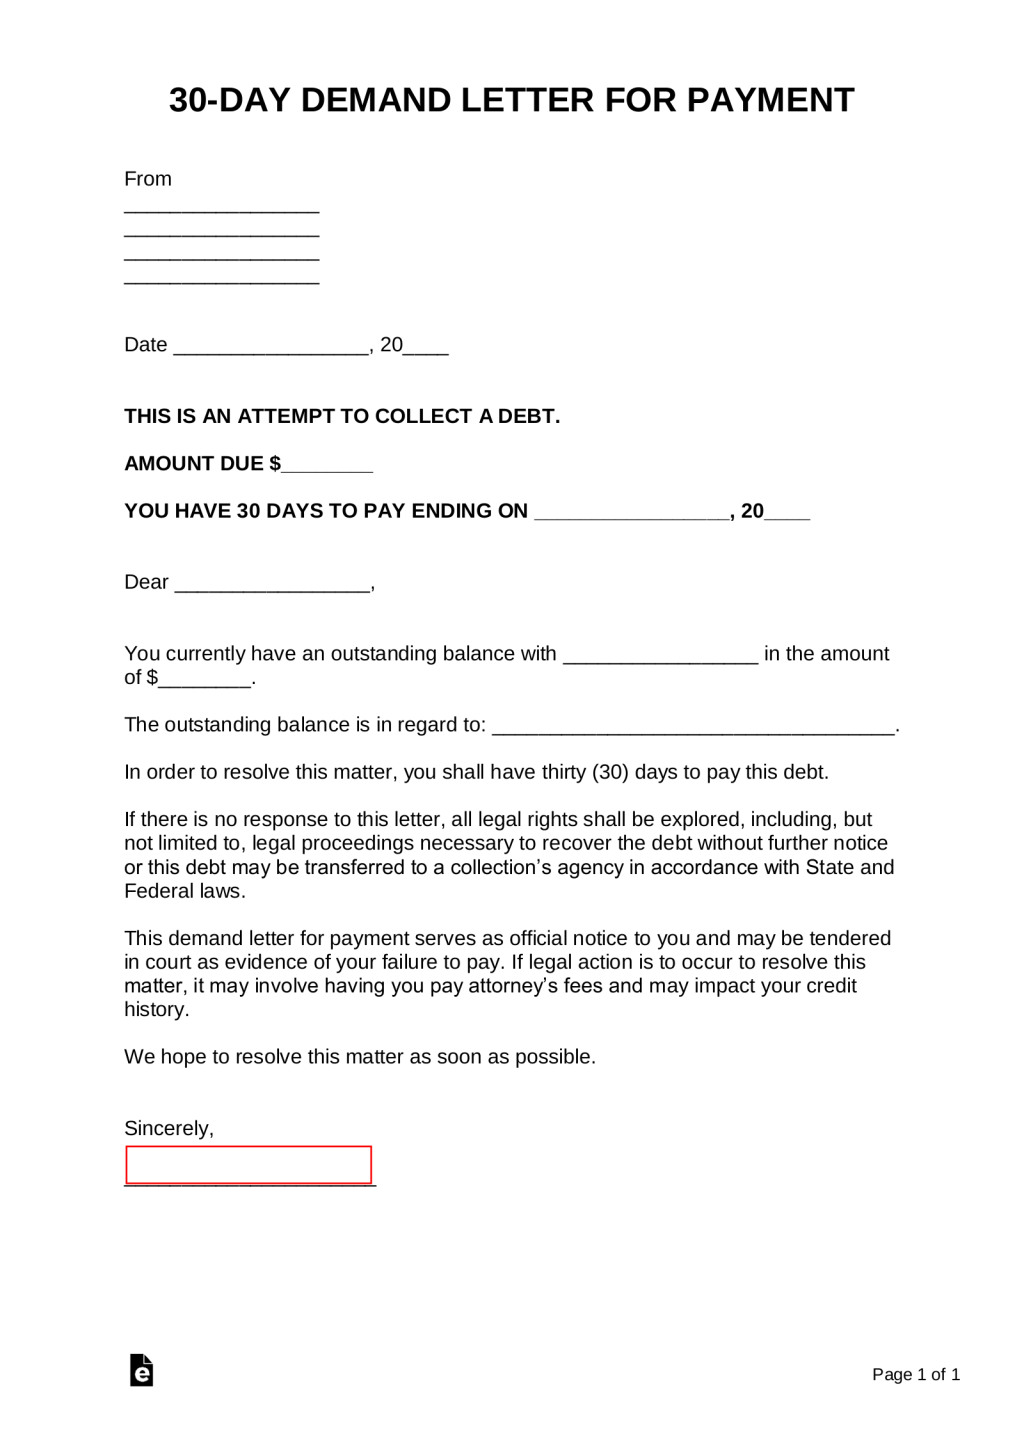 Picture of: Free Demand Letter Templates () – with Samples – PDF  Word – eForms